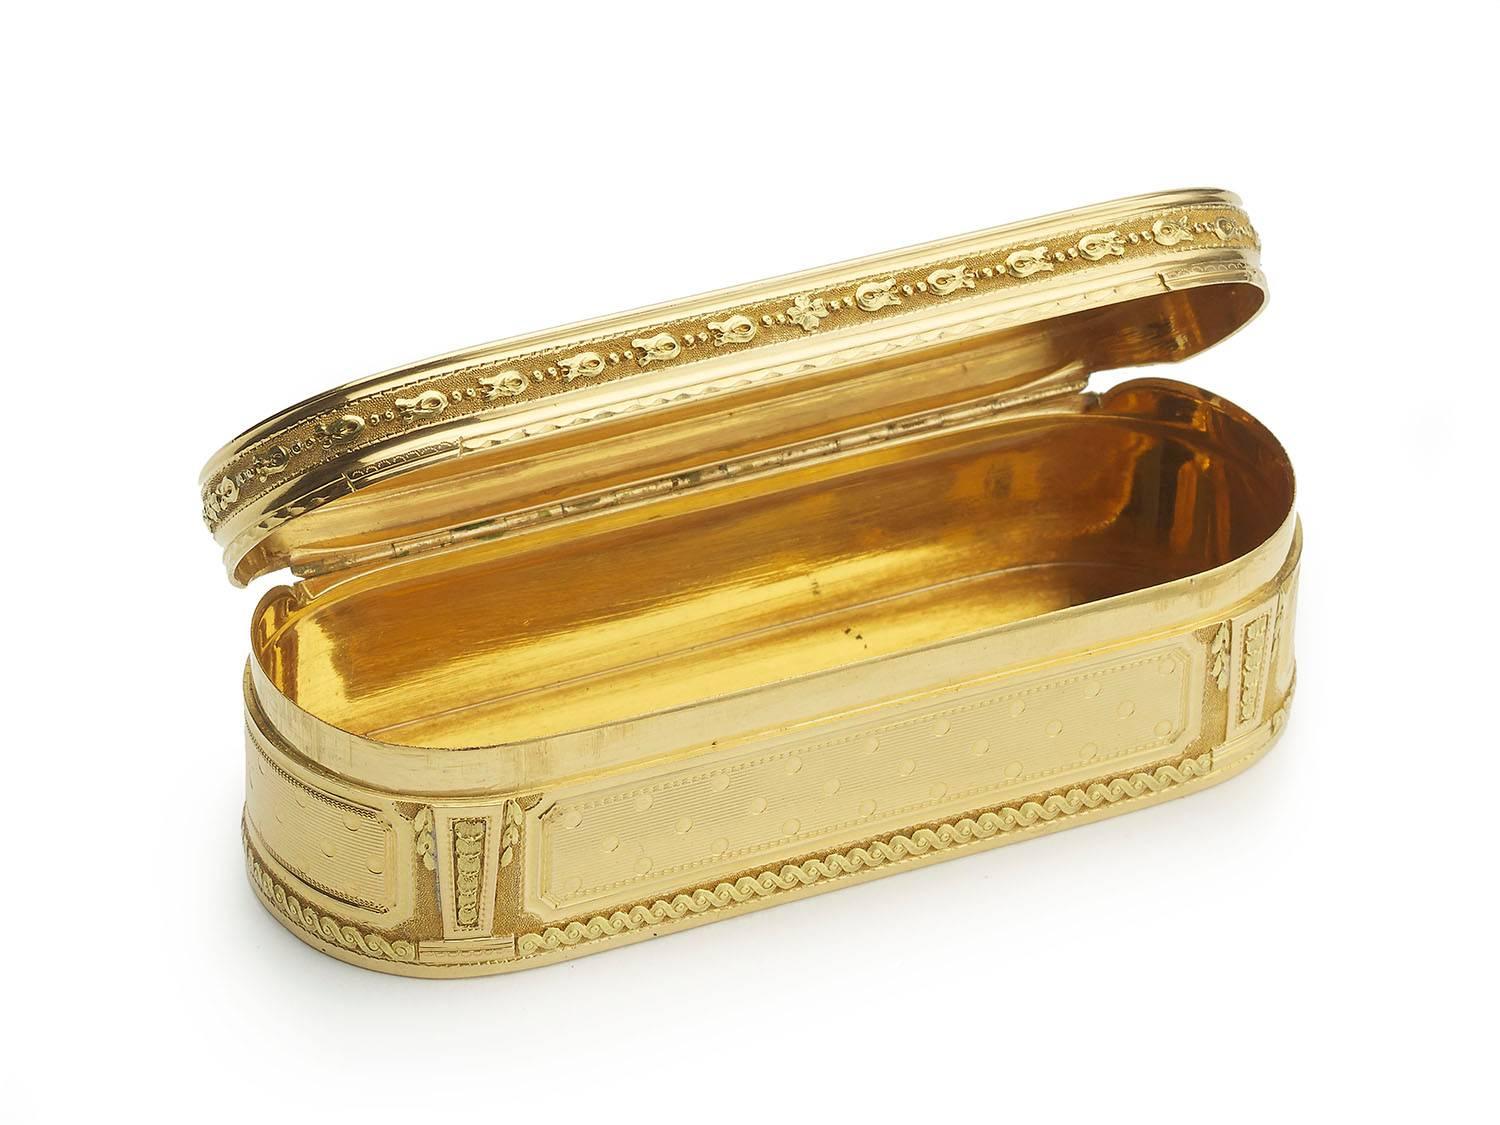 An antique, 18th century, gold box, the centre of the lid is decorated with engine turned dots on a lined background, with a garland surround on a textured background, the base is decorated in the same manner, the sides have the dot and line